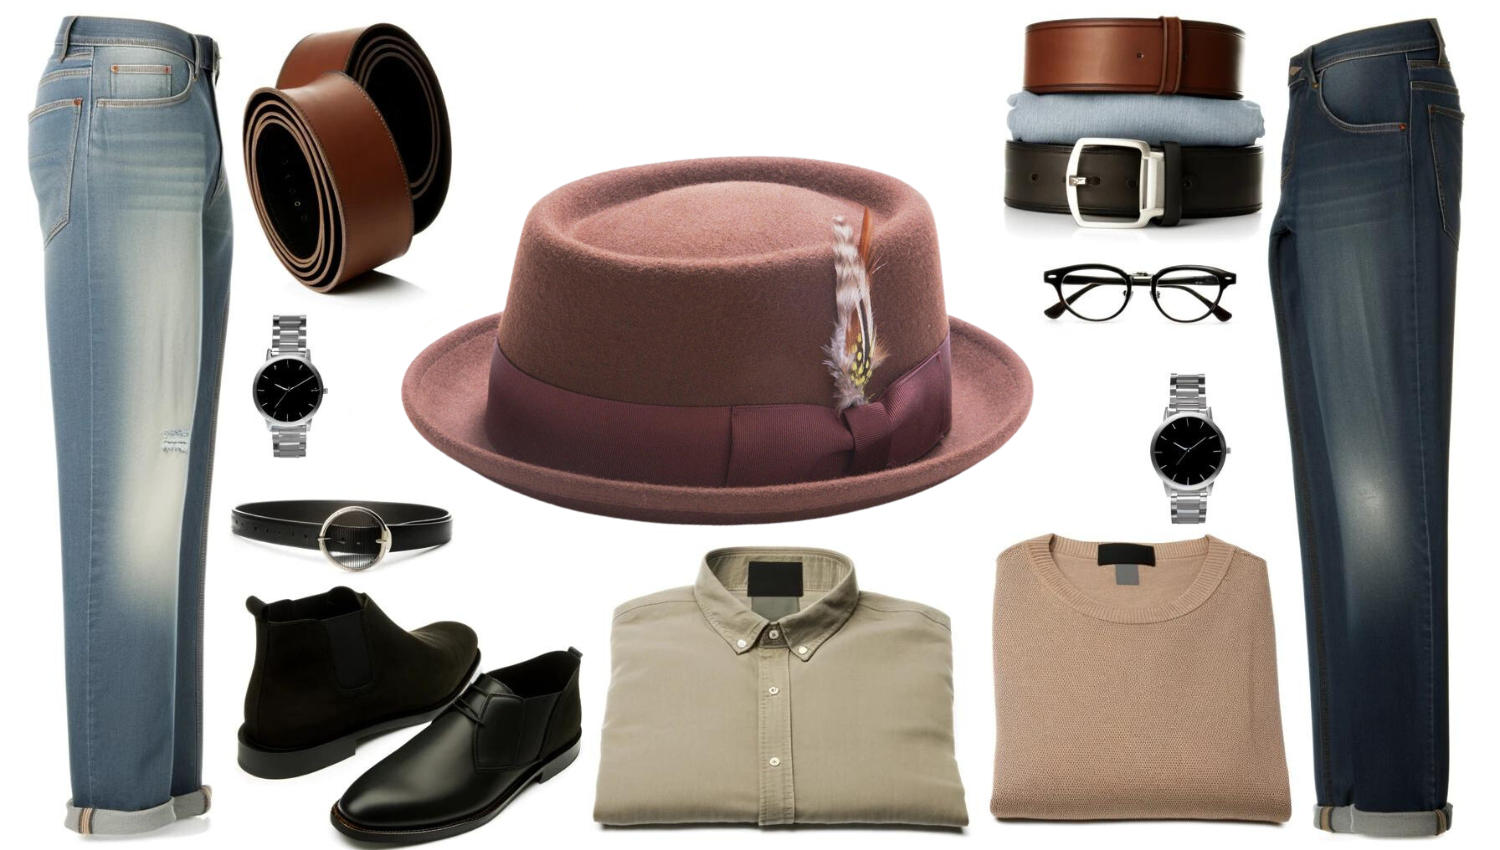 Styling Pork Pie Hats for Everyday Wear: Casual Outfit Pairing Tips